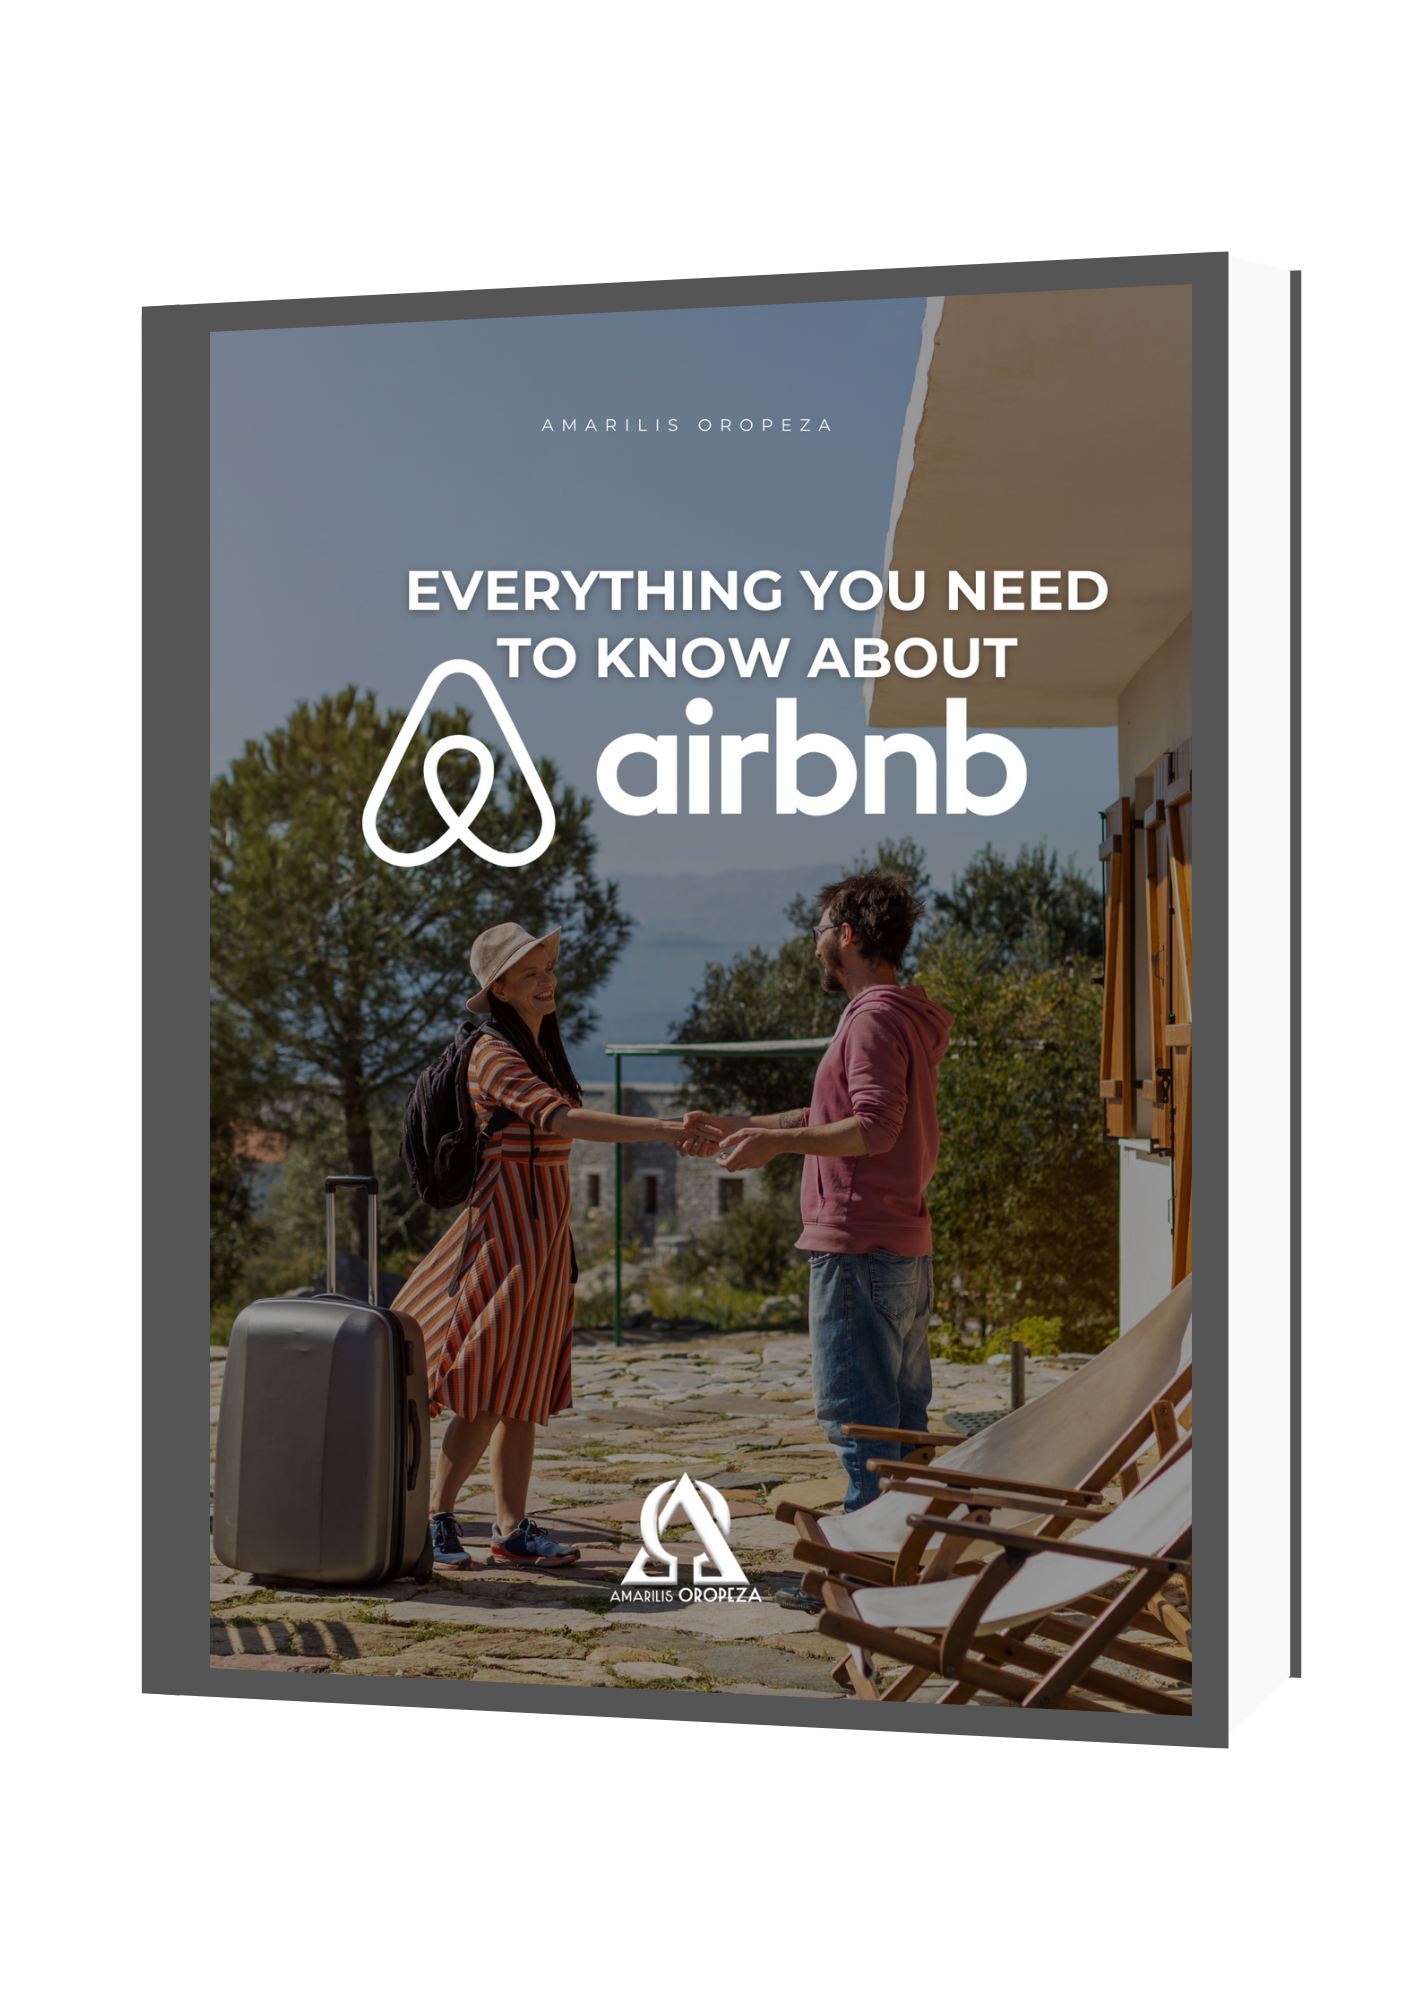 Everything you need to know about airbnb